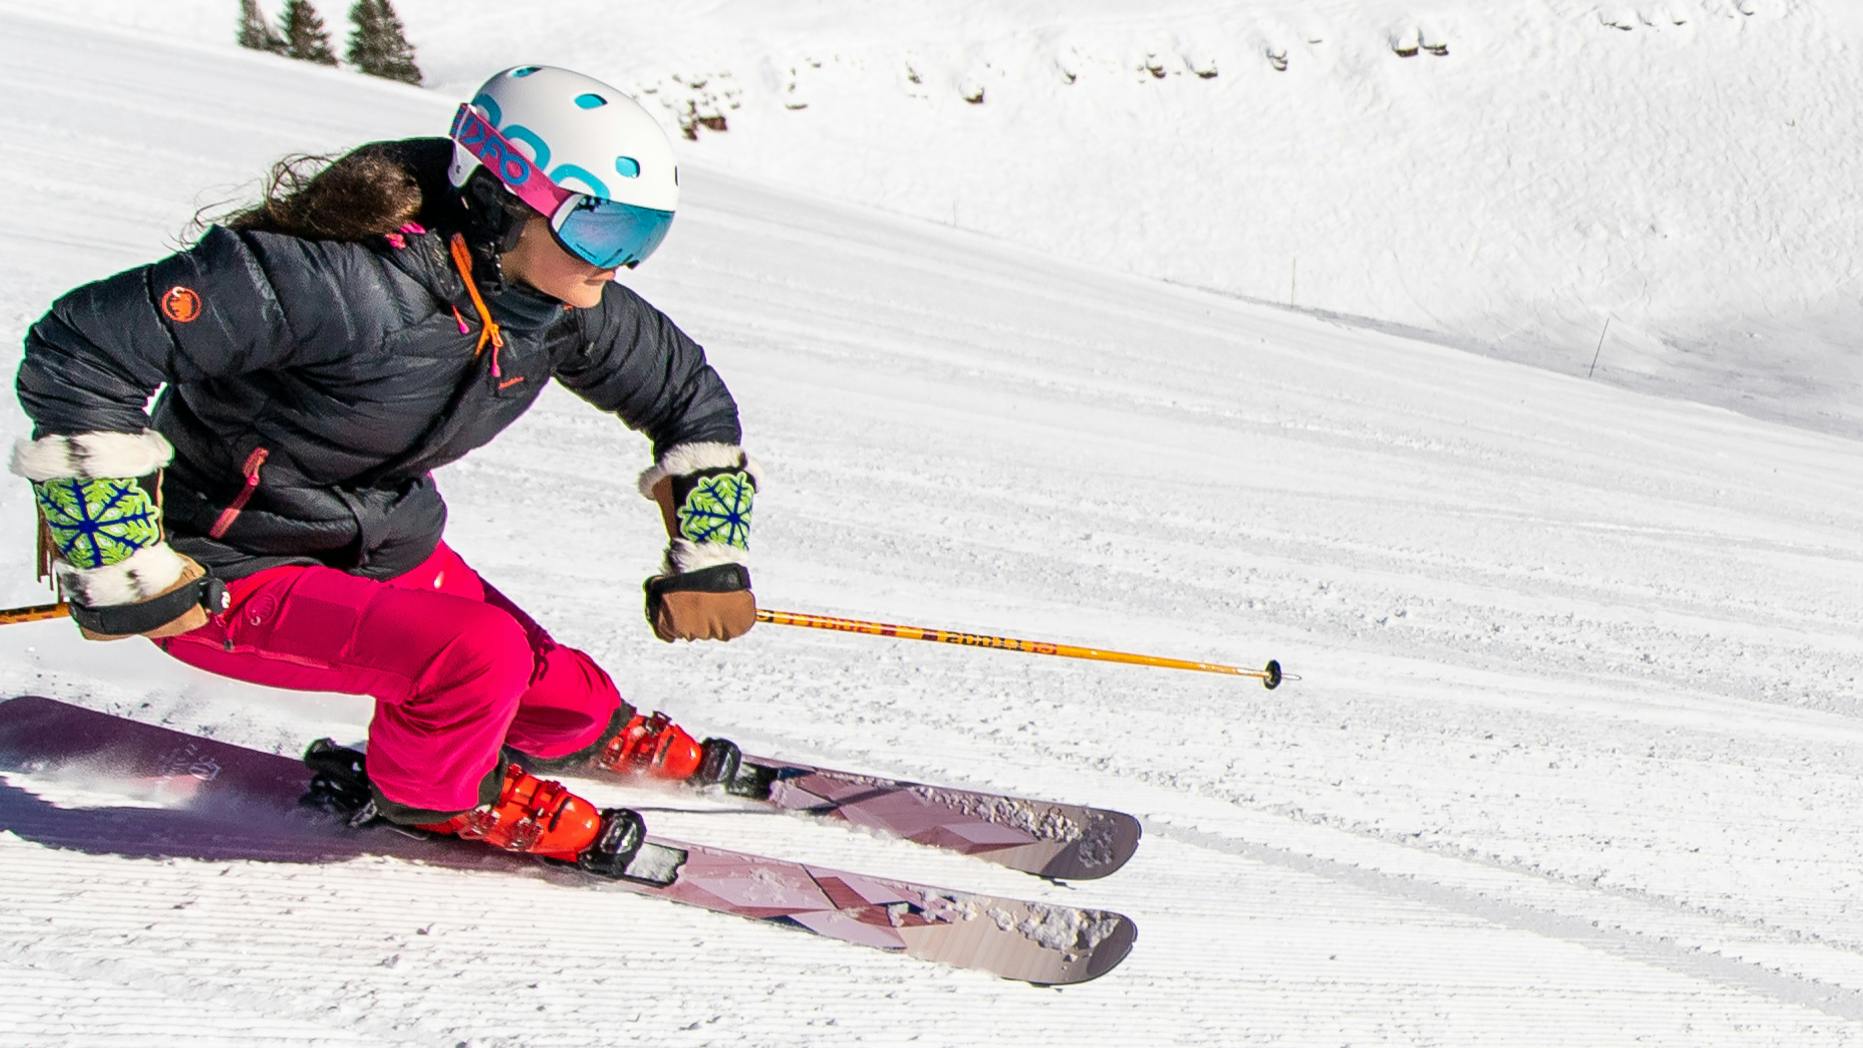 A woman in hot pink ski pants and a black jacket on purple skis and with orange poles skiing down a groomer slope.